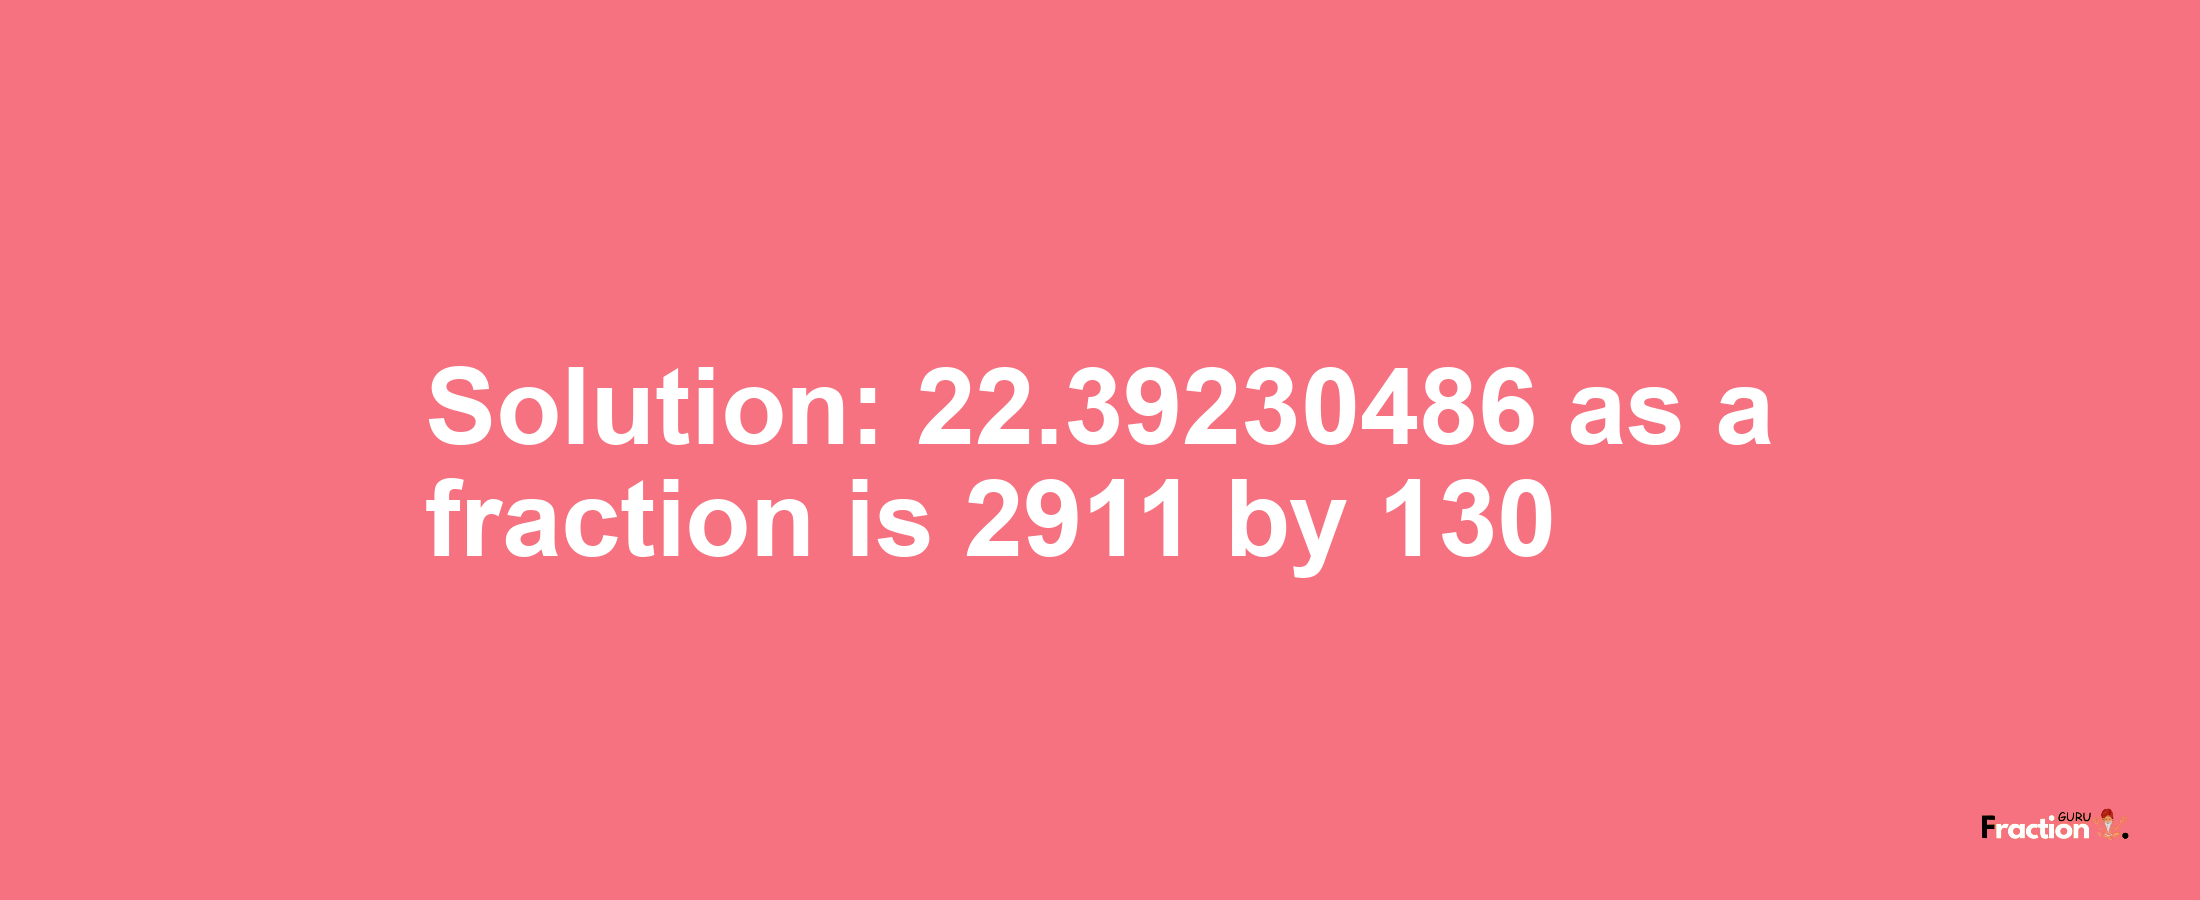 Solution:22.39230486 as a fraction is 2911/130